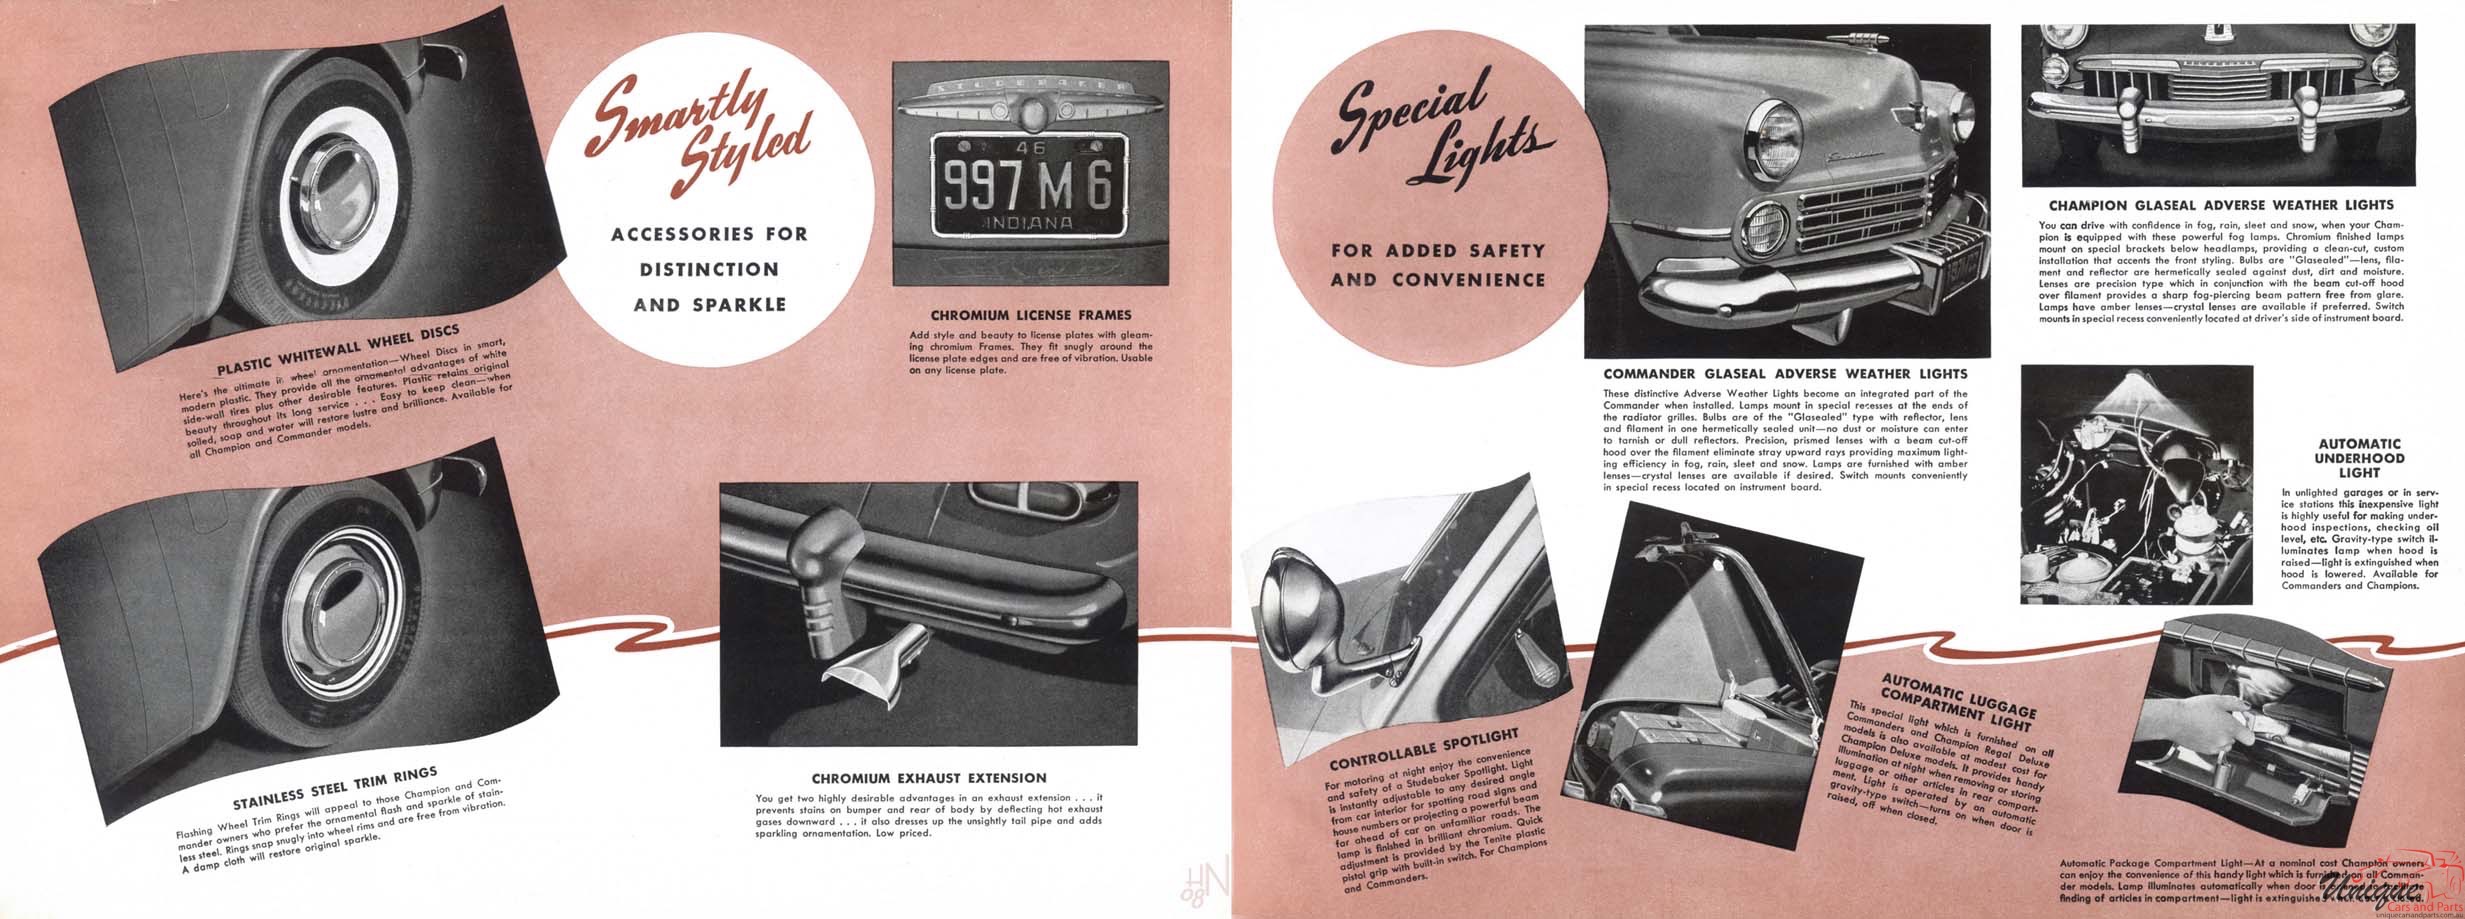 1947 Studebaker Accessories Booklet Page 10